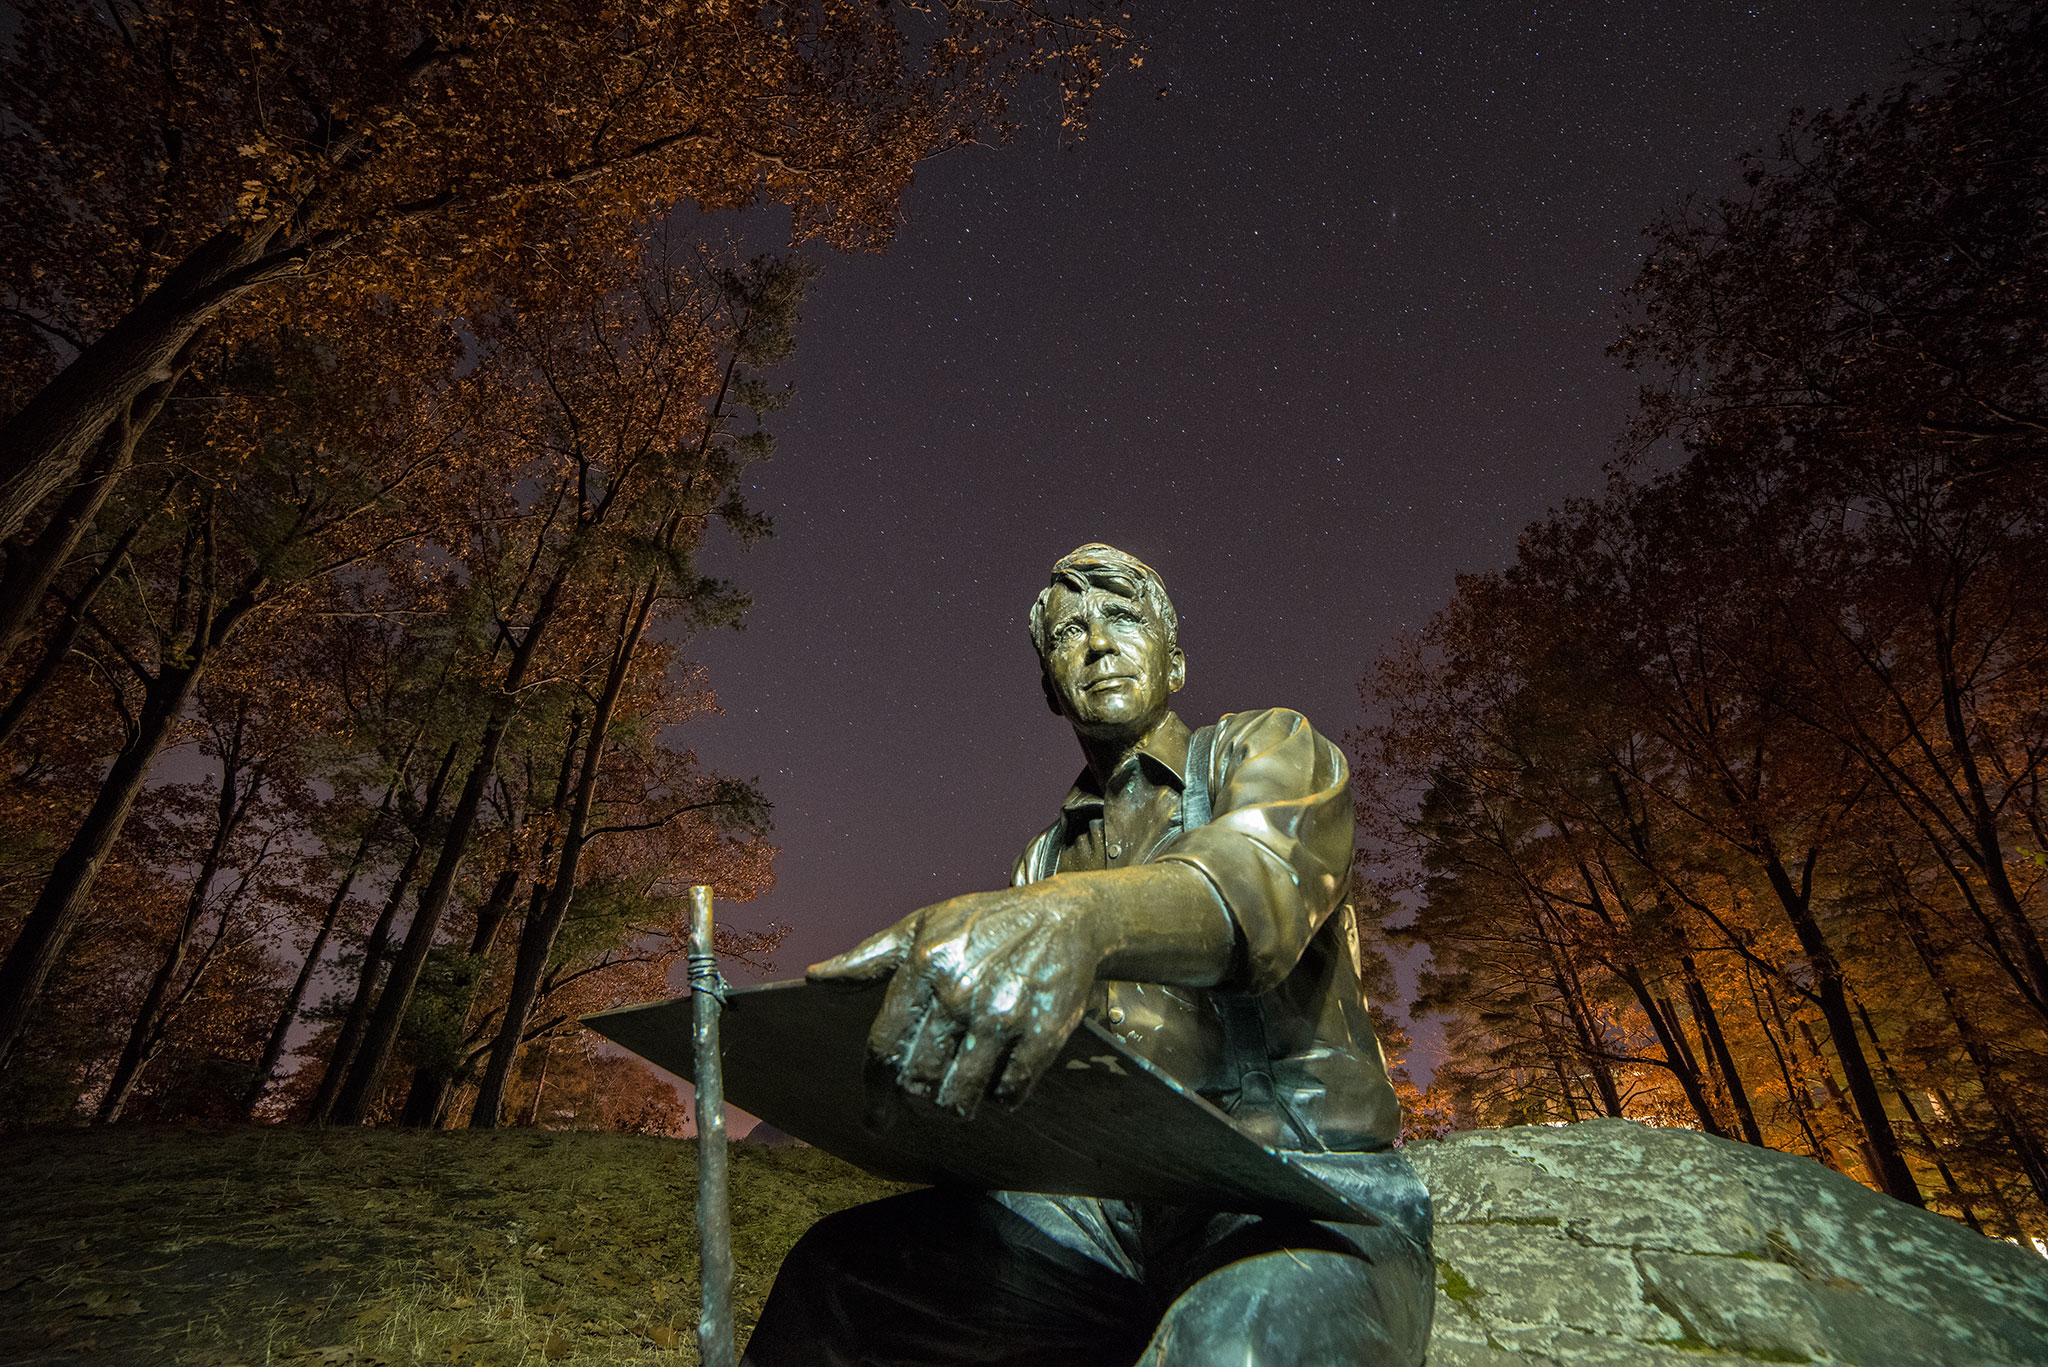 The Robert Frost statue on a clear fall night in 2015.